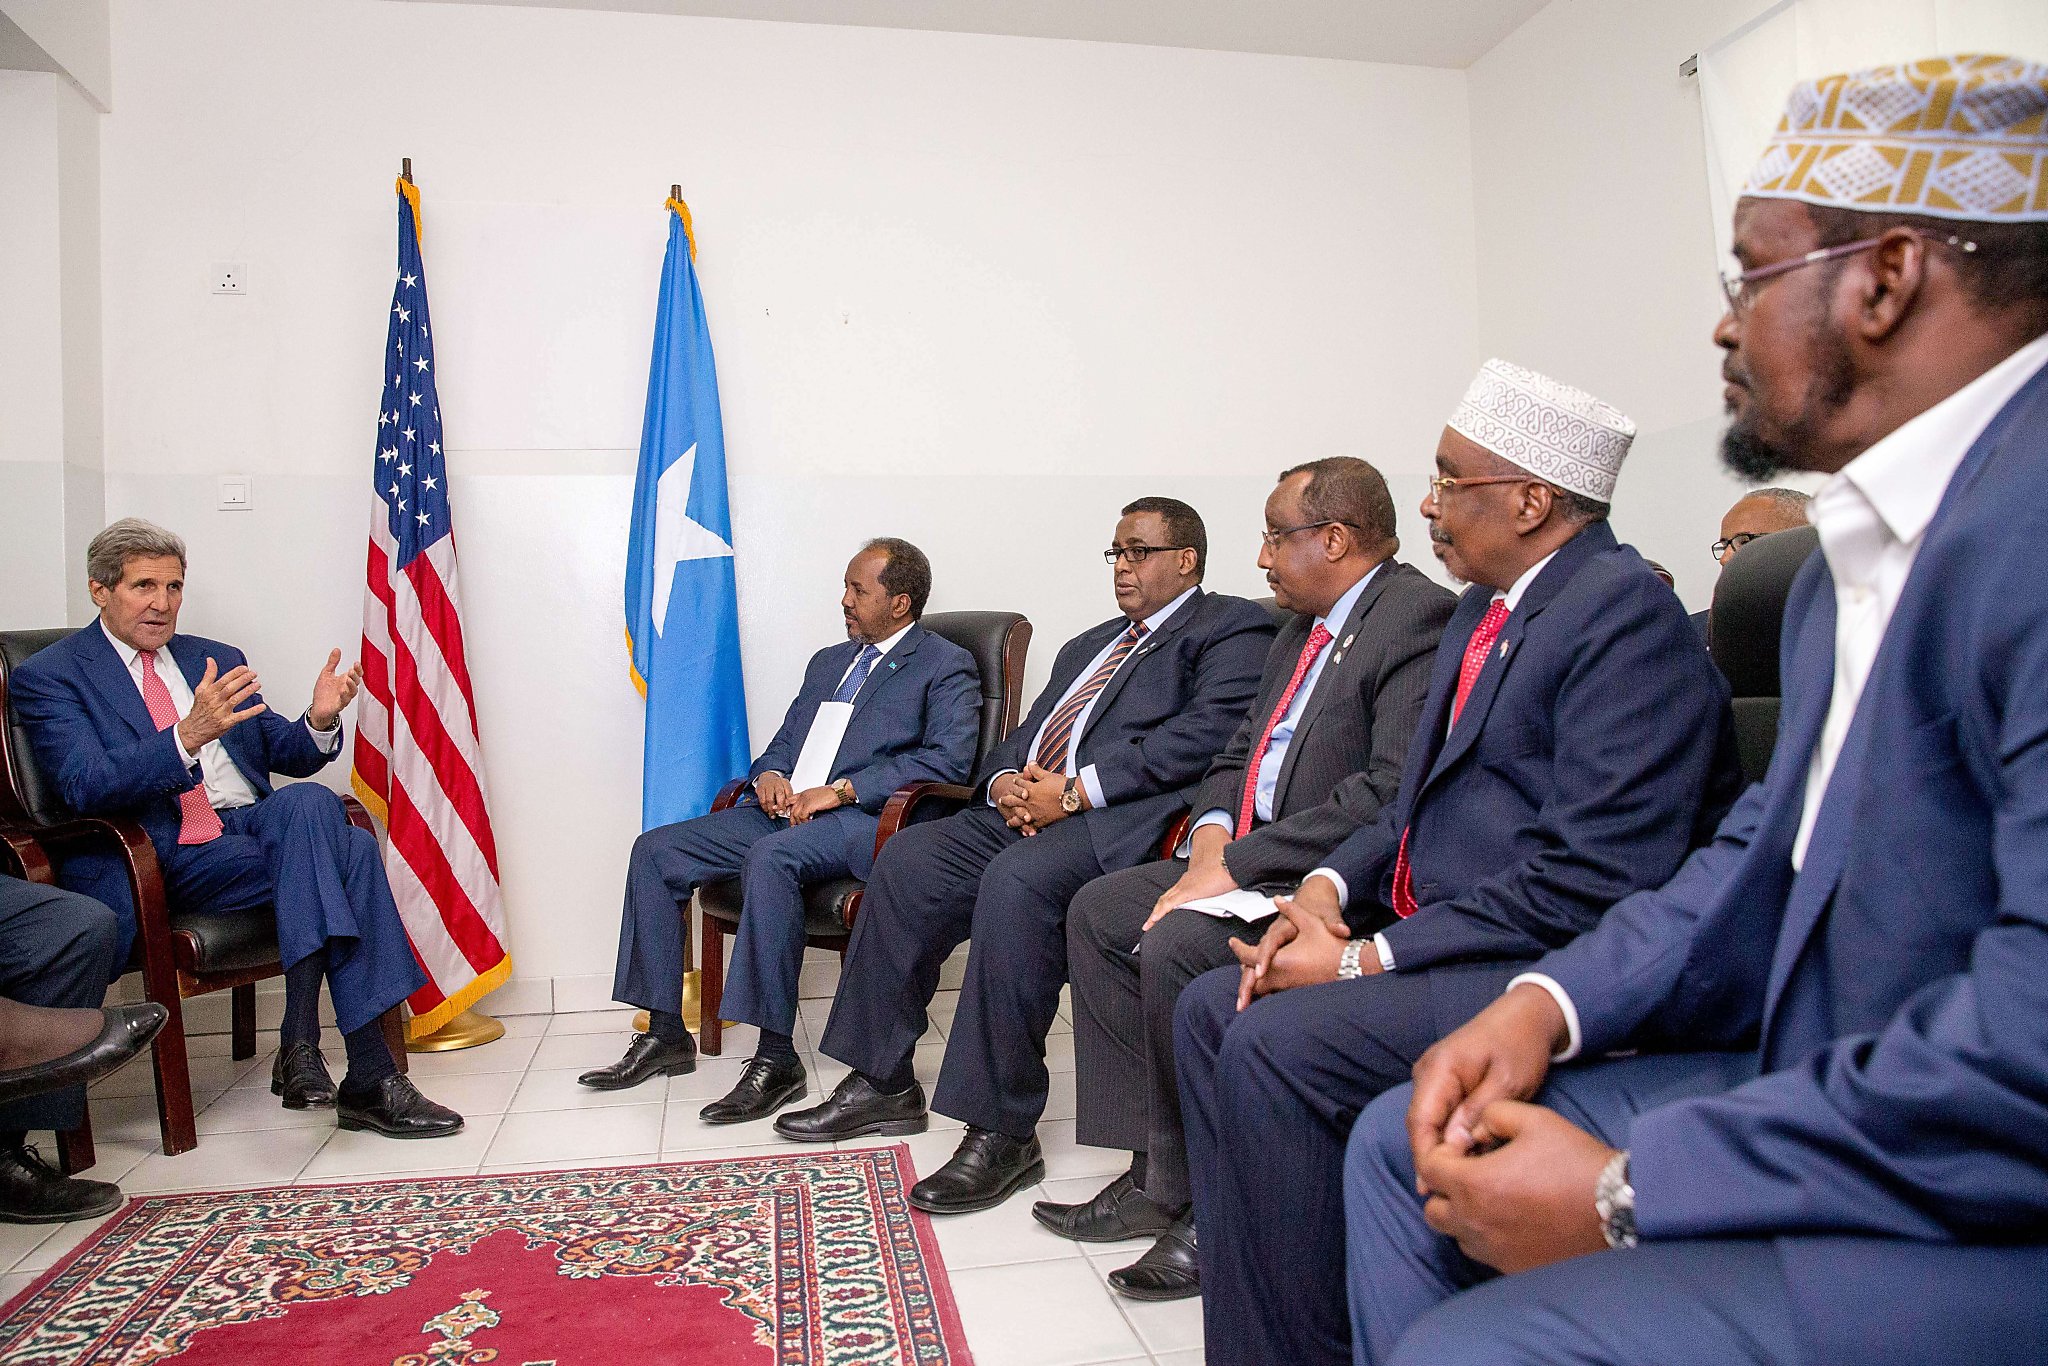 Two decades after 'Black Hawk Down,' Kerry visits Somalia 